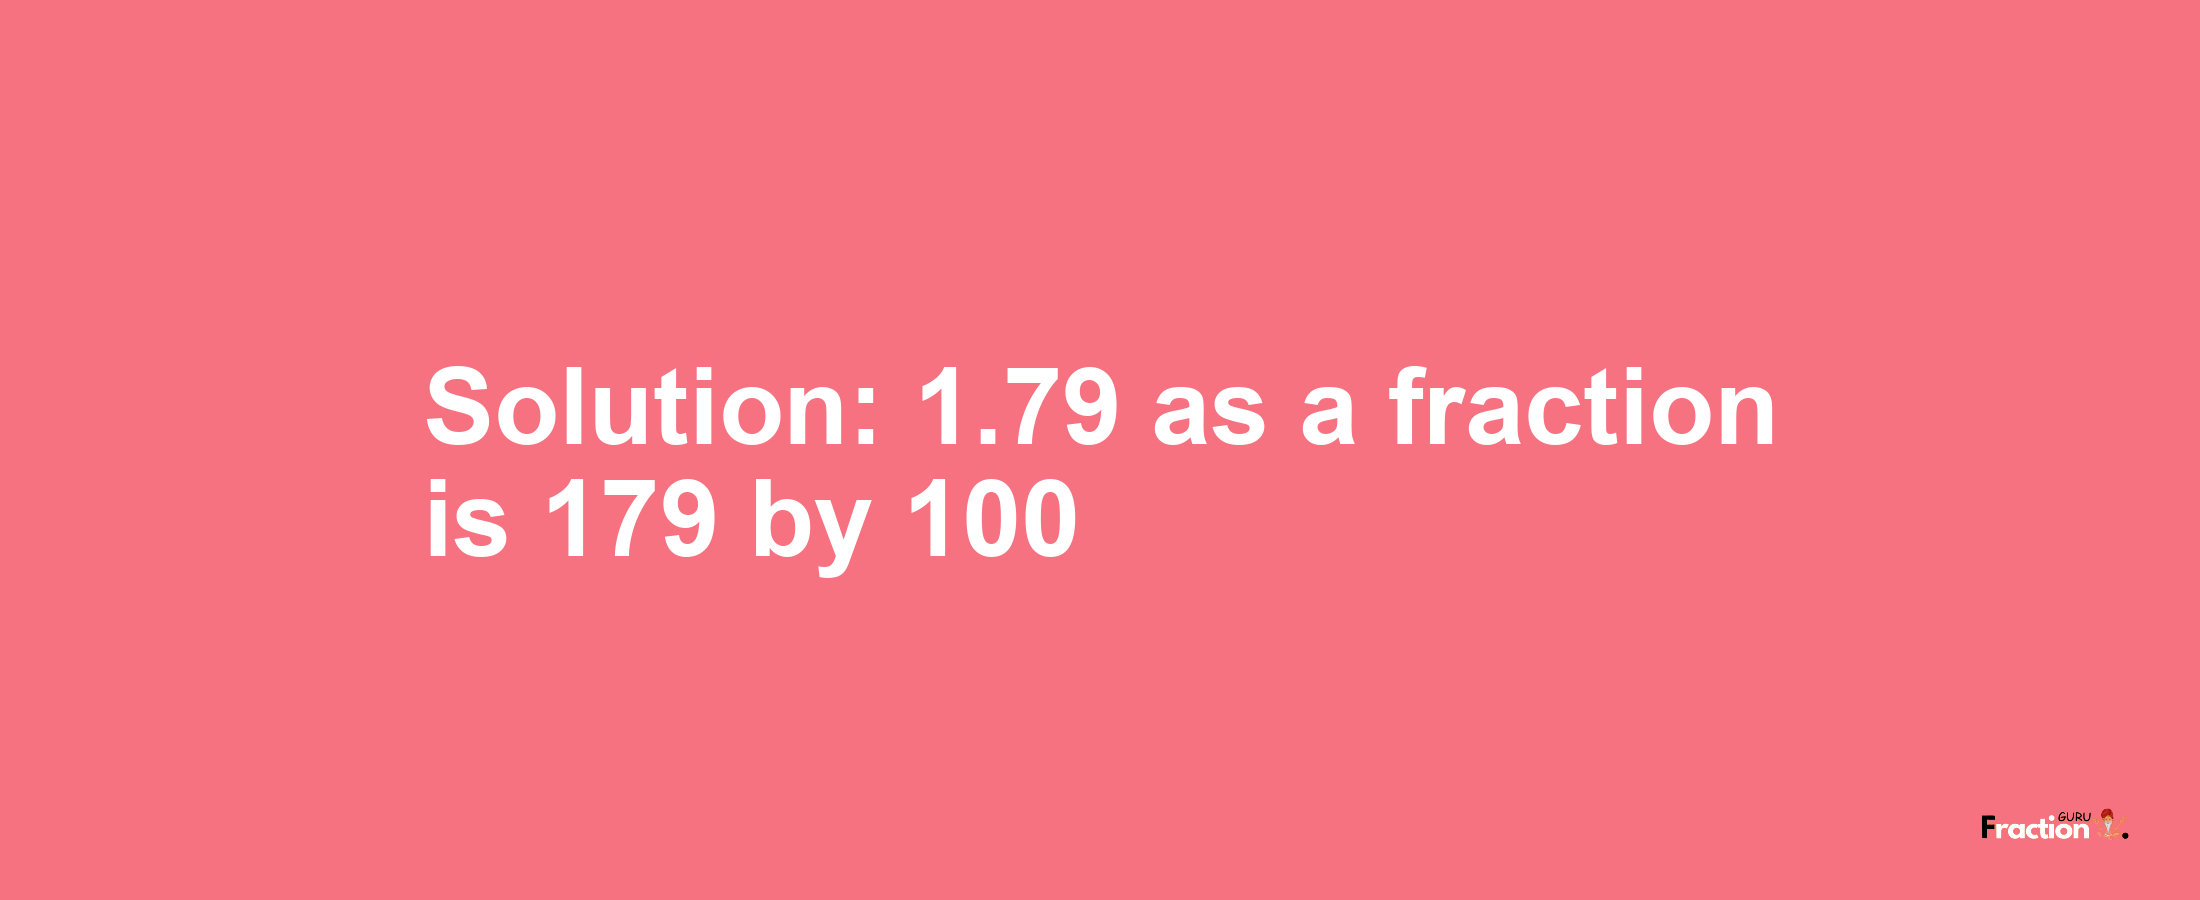 Solution:1.79 as a fraction is 179/100